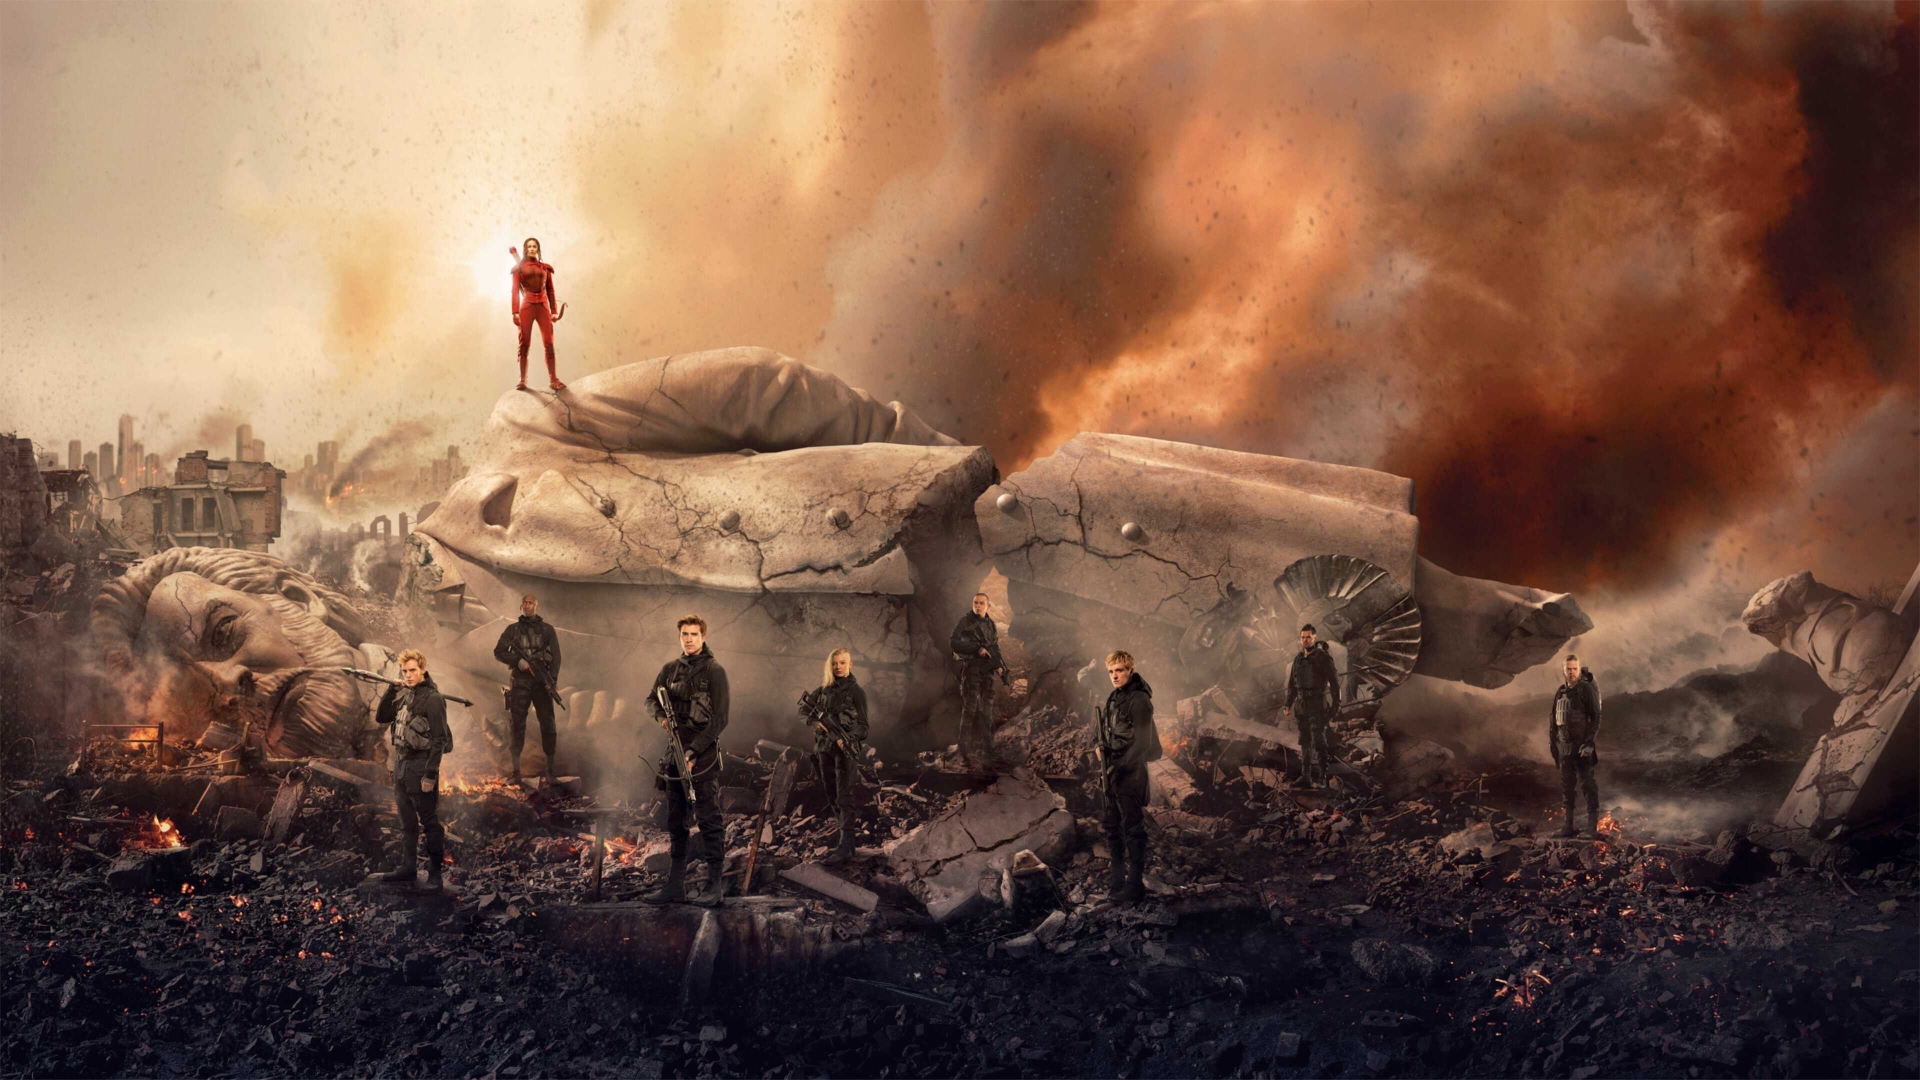 The Hunger Games: Mockingjay - Part 2 (The Hunger Games: Mockingjay - Part 2)